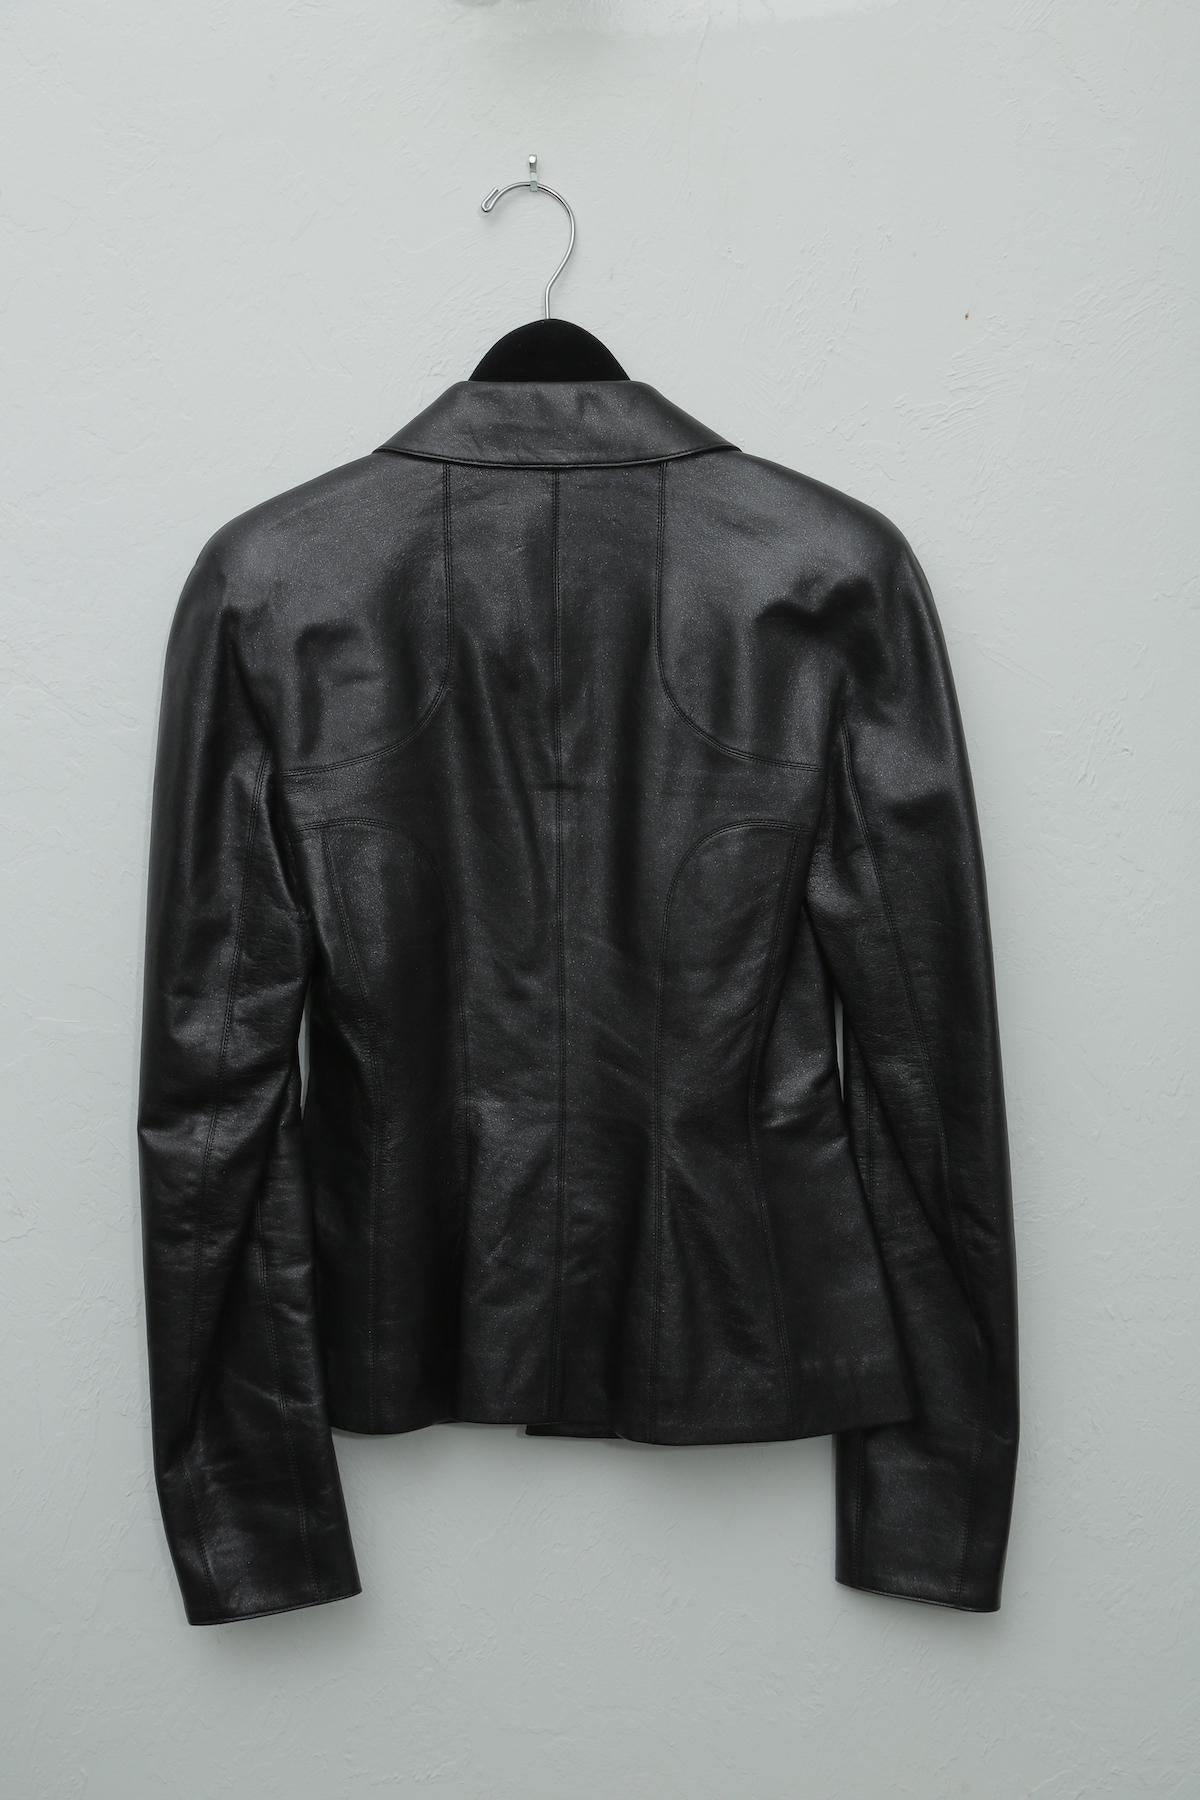 Chanel Black Metallic Fitted with Silver Logo Buttons Jacket For Sale 1